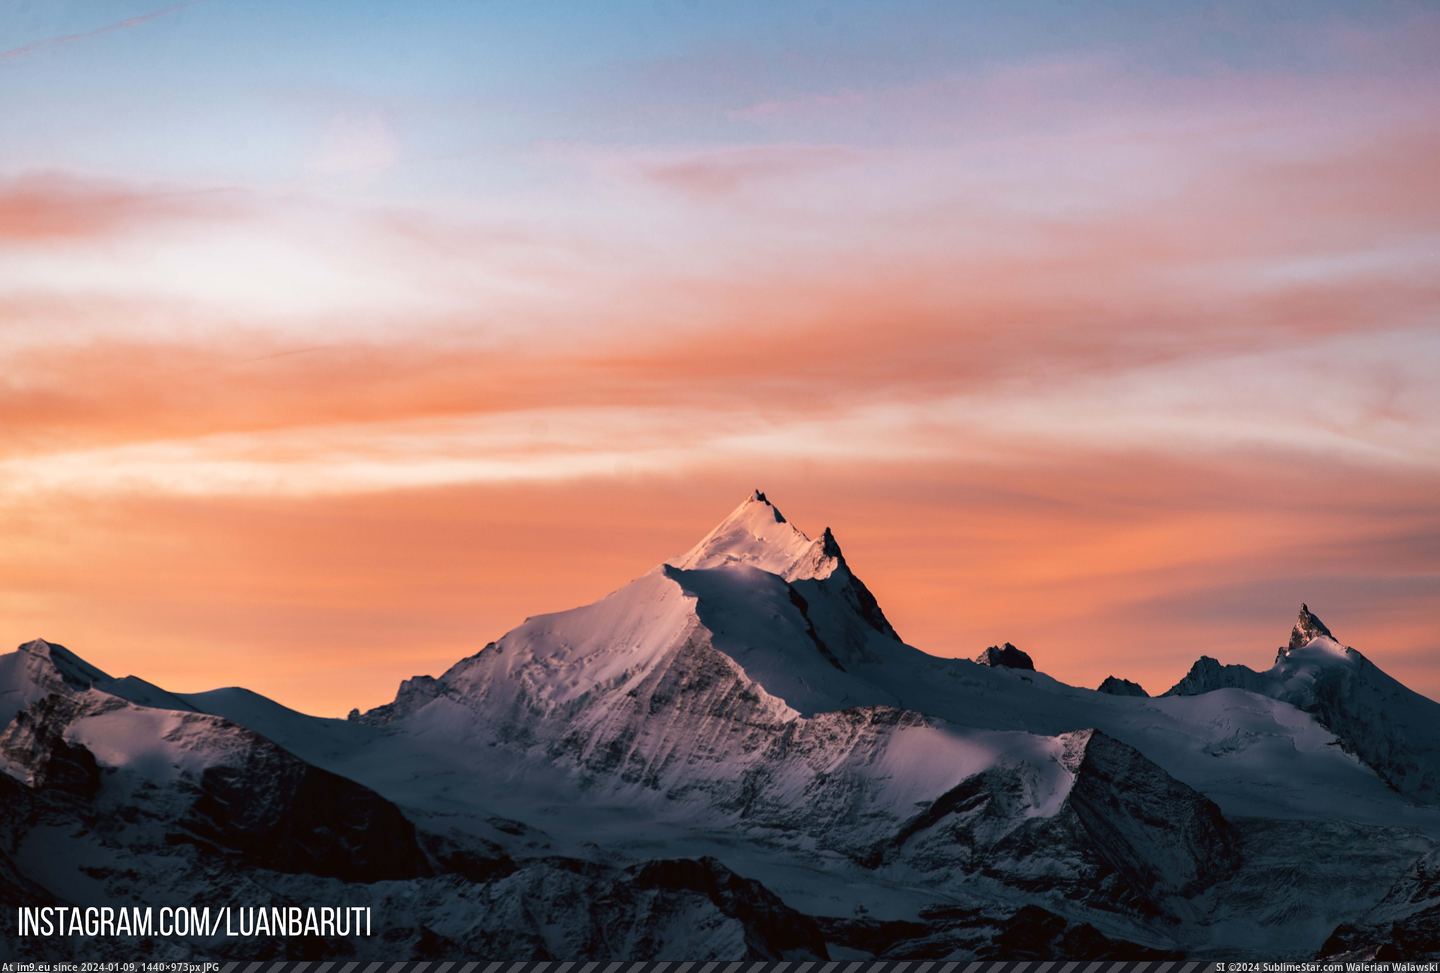 #Night #Original #Dawn #Catch #File #Spent #Mountain [Earthporn] I spent the night on 10.000ft to catch the Weisshorn mountain at dawn. [original file in comments] [6016x4016] Pic. (Obraz z album My r/EARTHPORN favs))